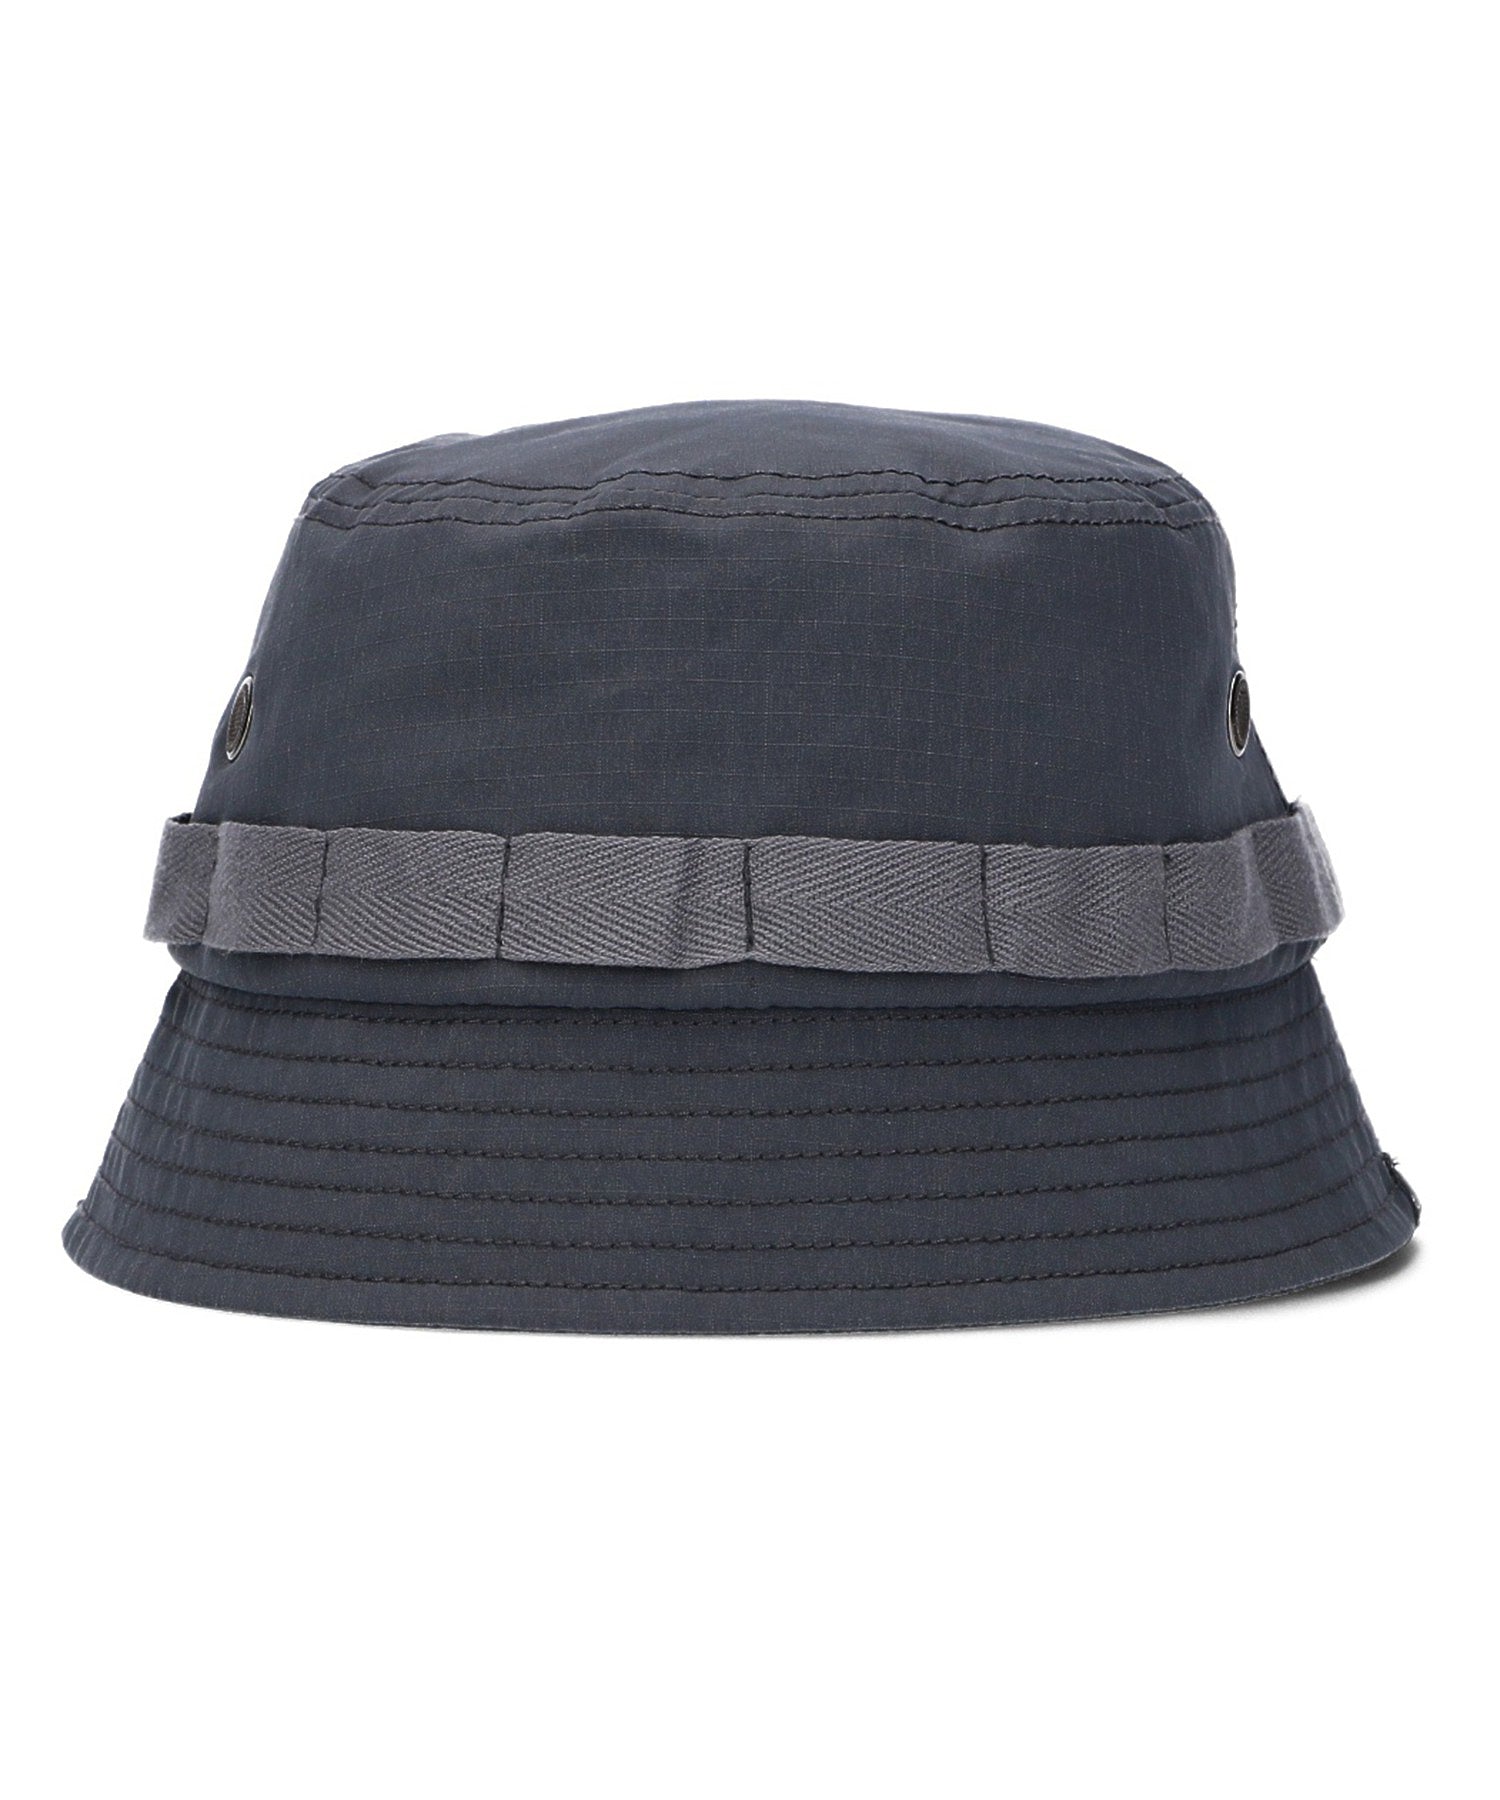 RIPSTOP MILITARY HAT XLARGE